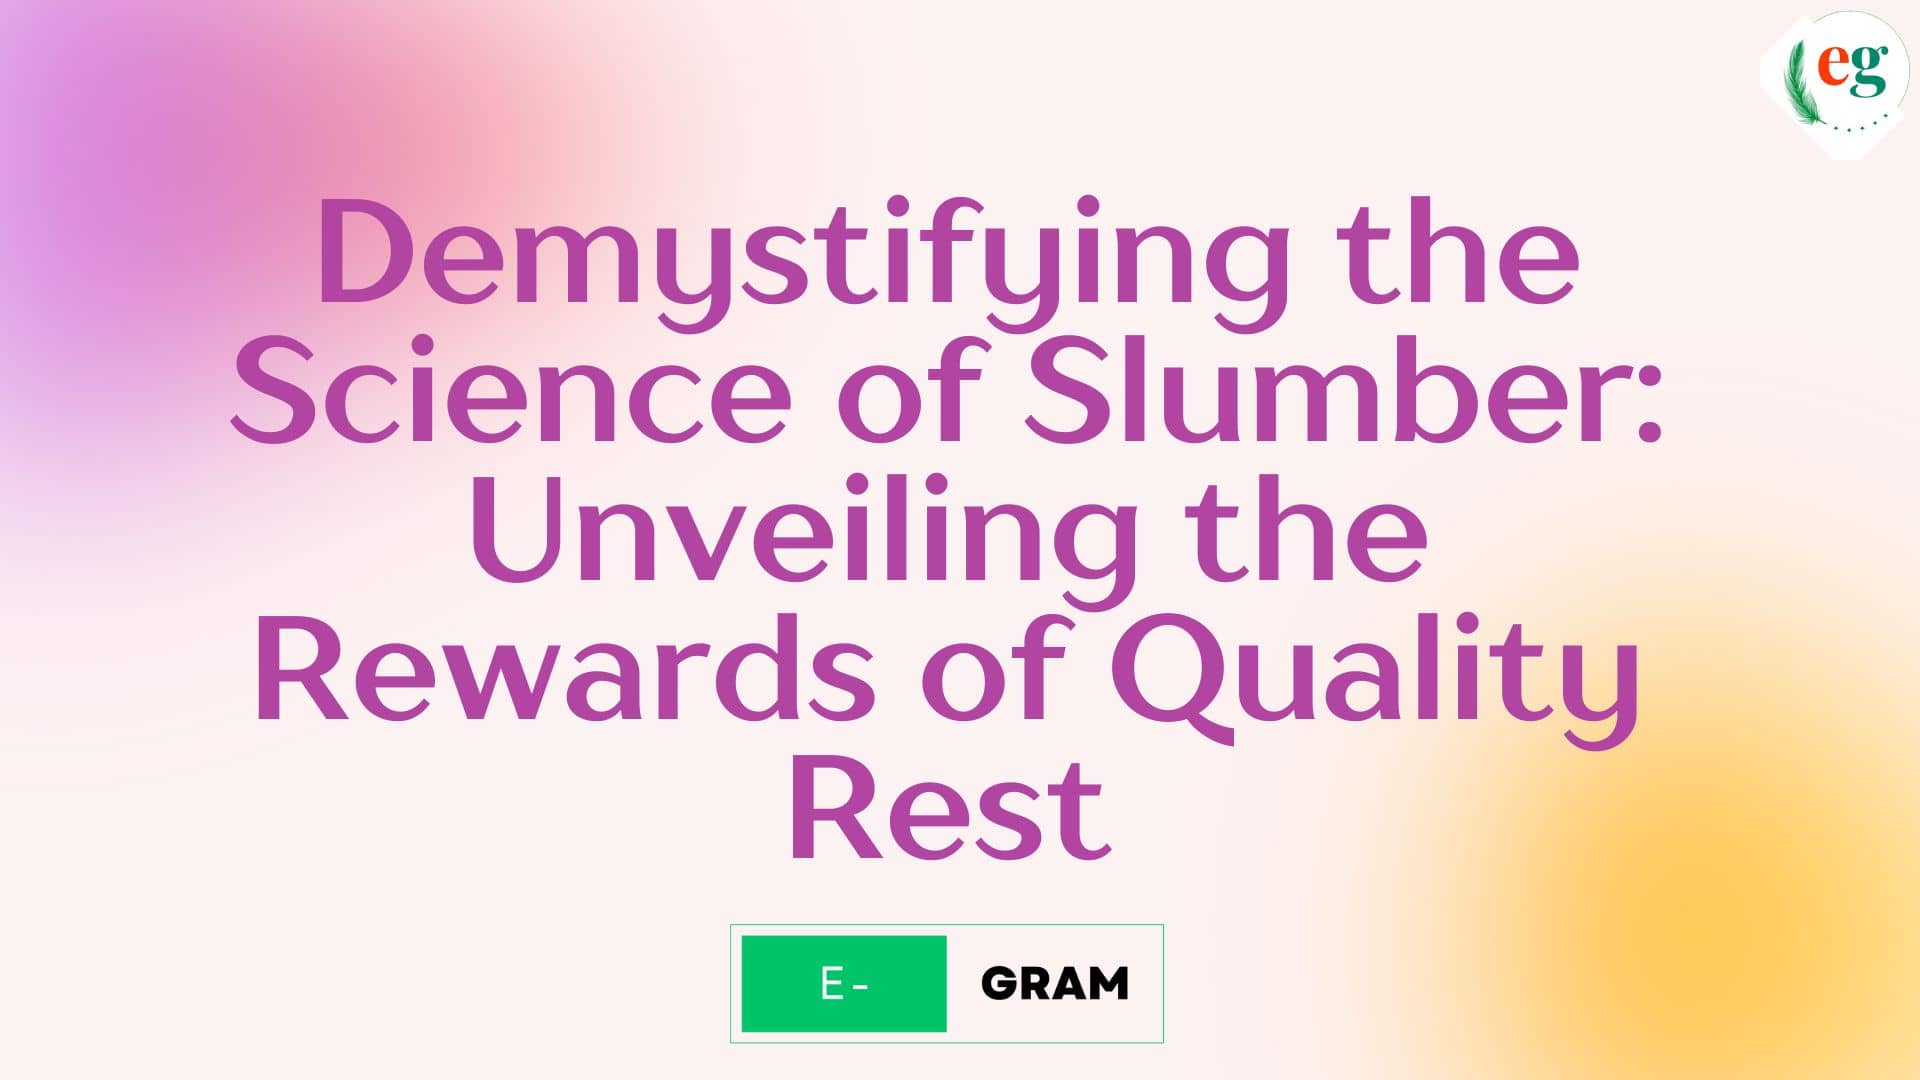 Demystifying the Science of Slumber: Unveiling the Rewards of Quality Rest